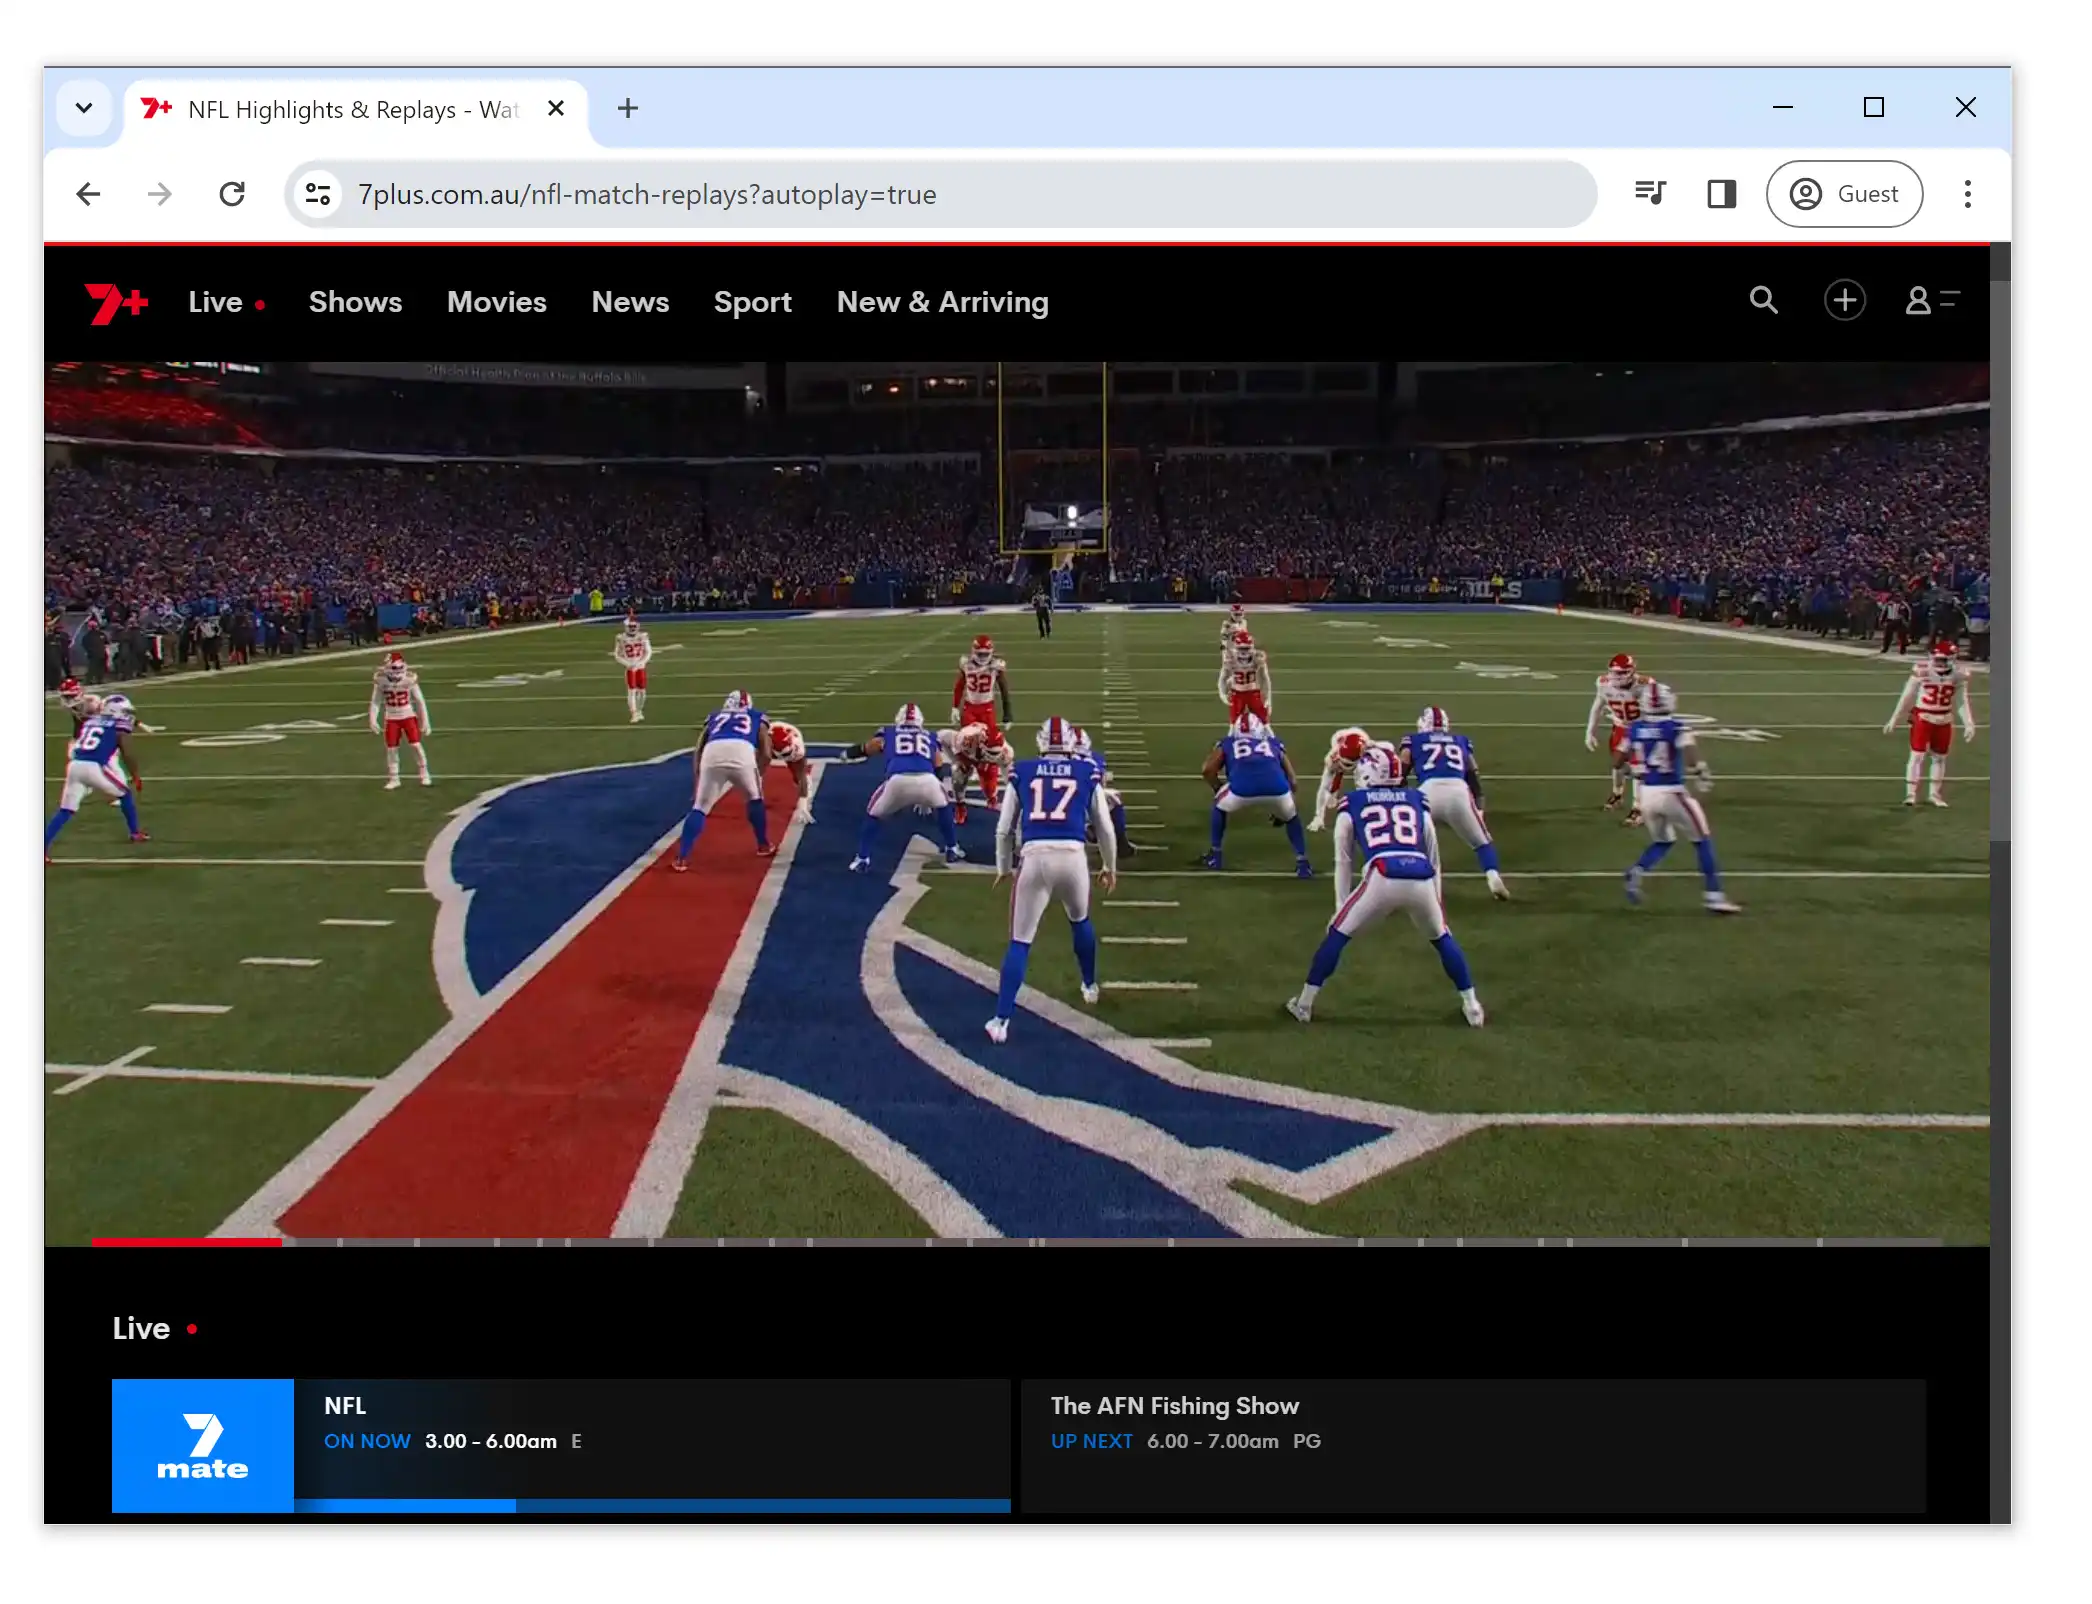 Streaming the Super Bowl on 7plus.